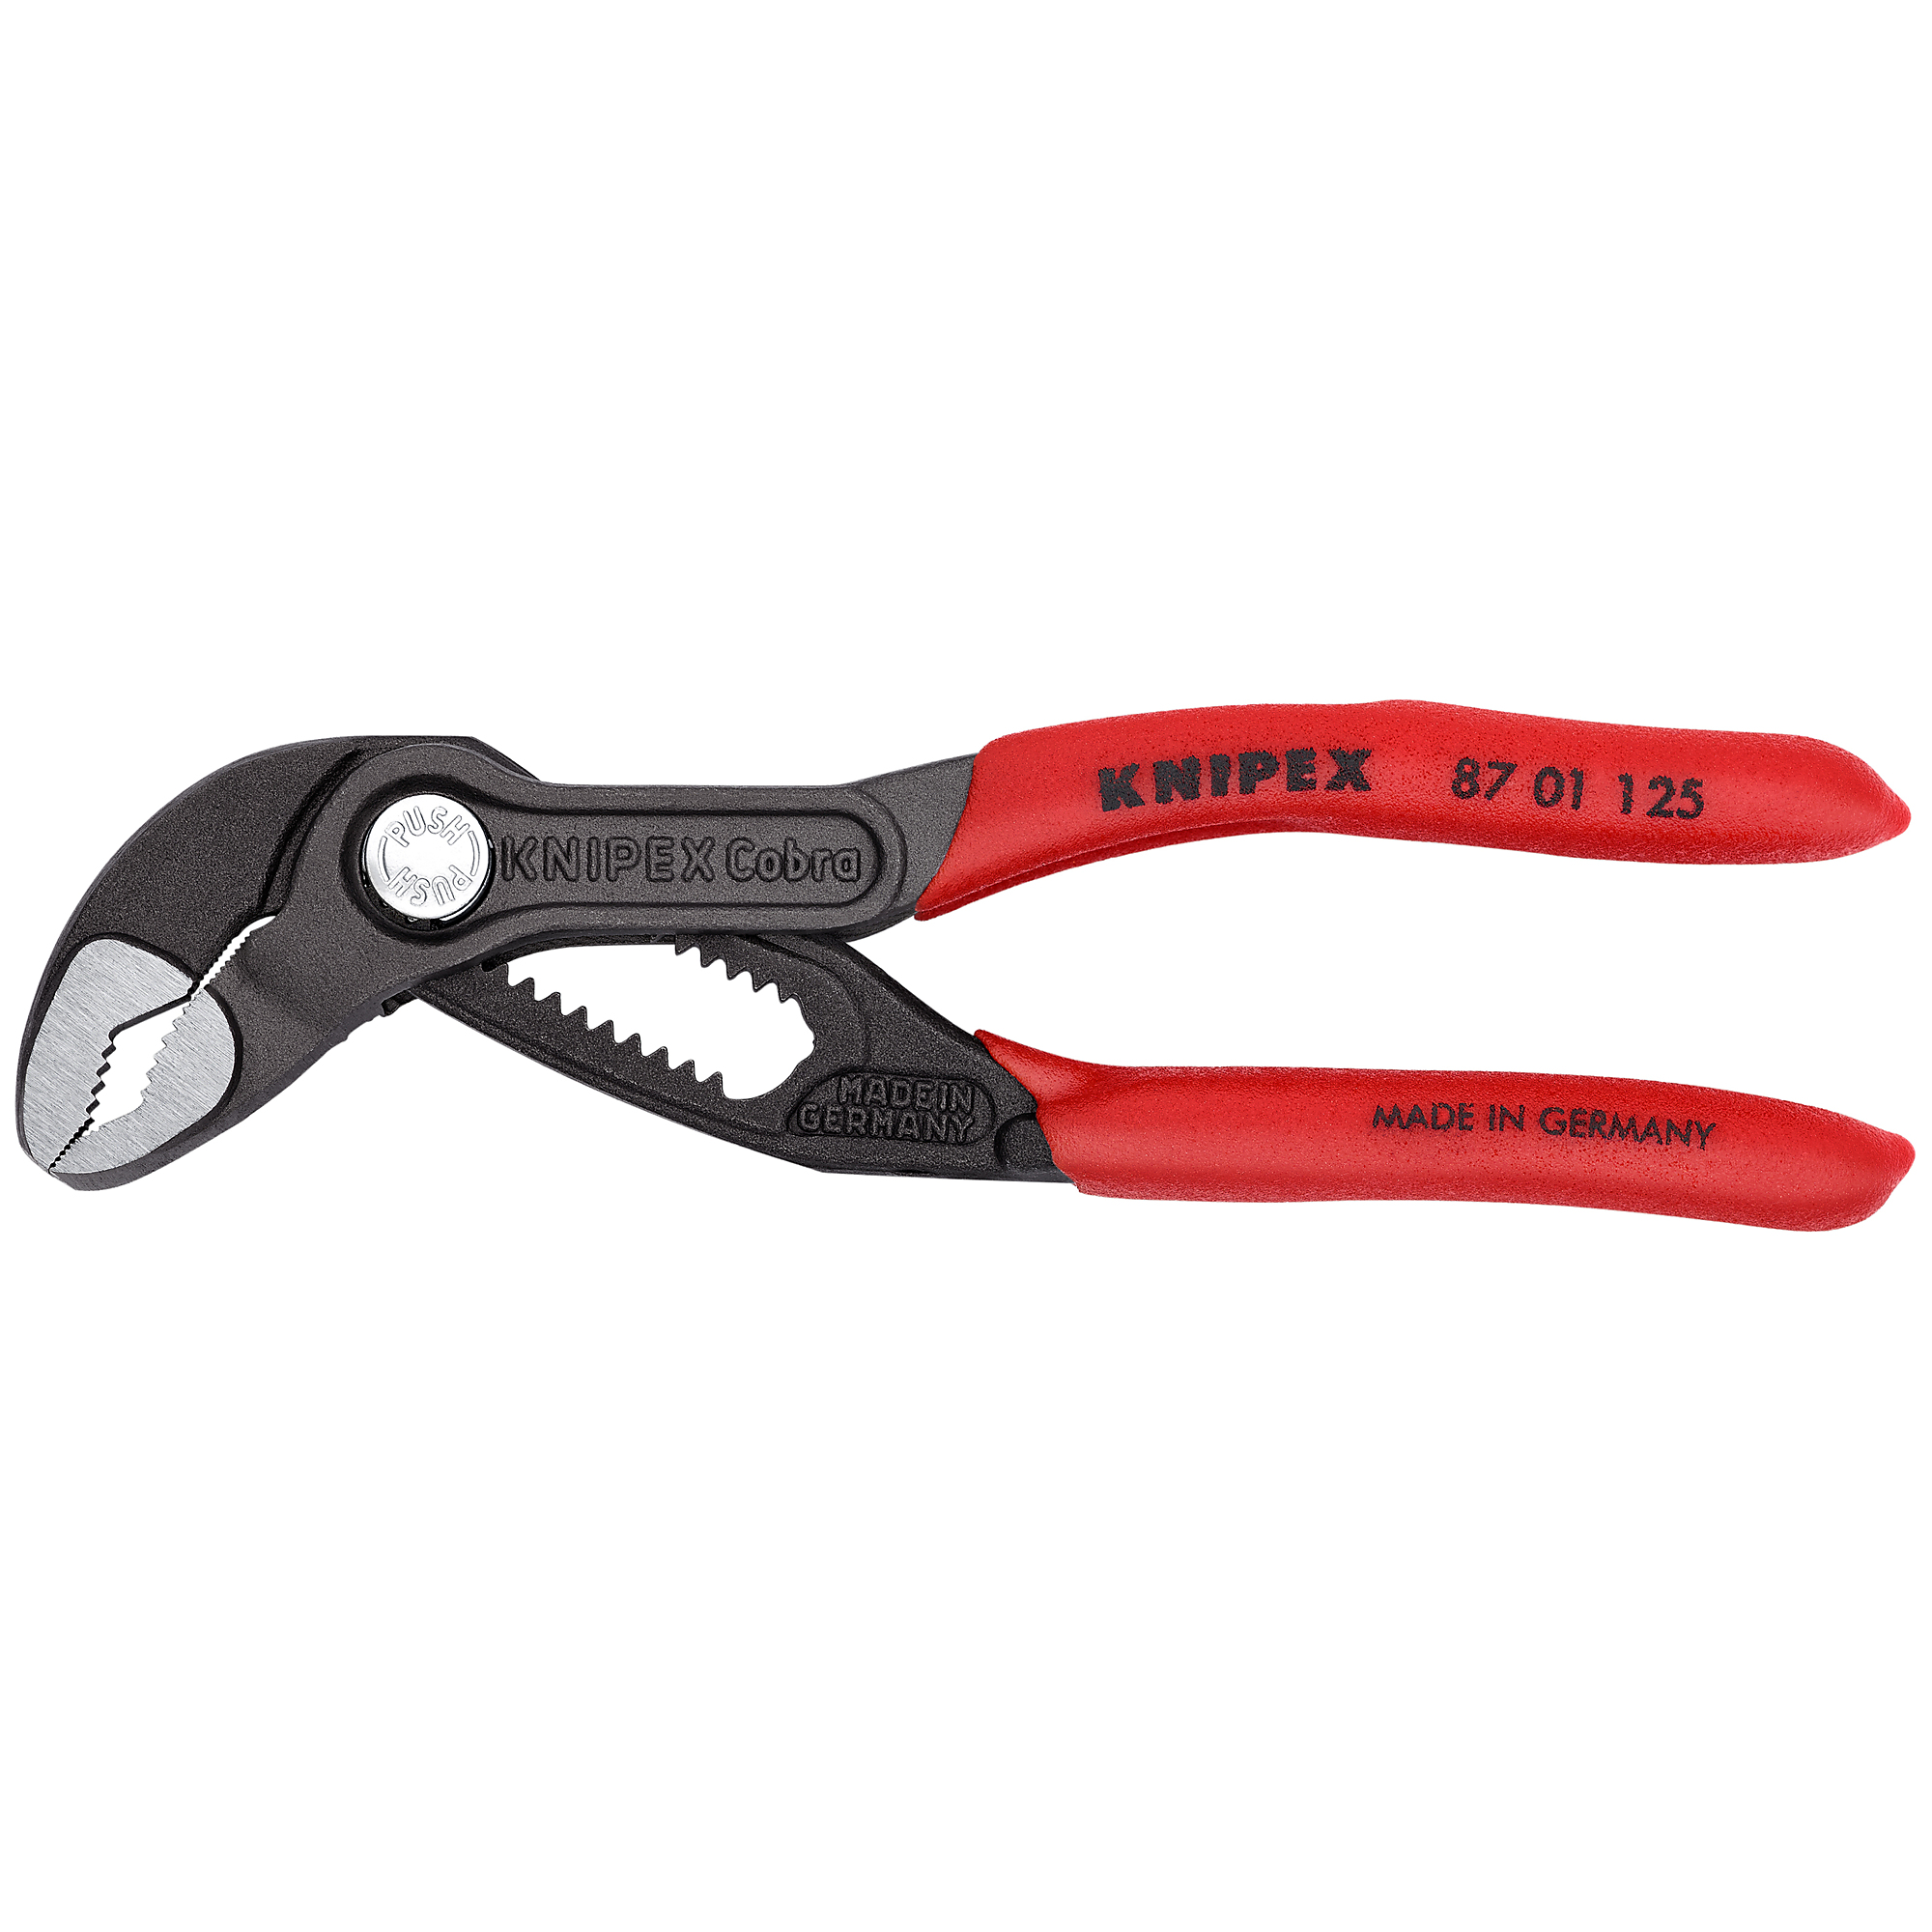 KNIPEX Cobra , Cobra Water Pump Pliers, Non-slip plastic, 5Inch, Pieces (qty.) 1 Material Steel, Jaw Capacity 1.063 in, Model 87 01 125 SBA